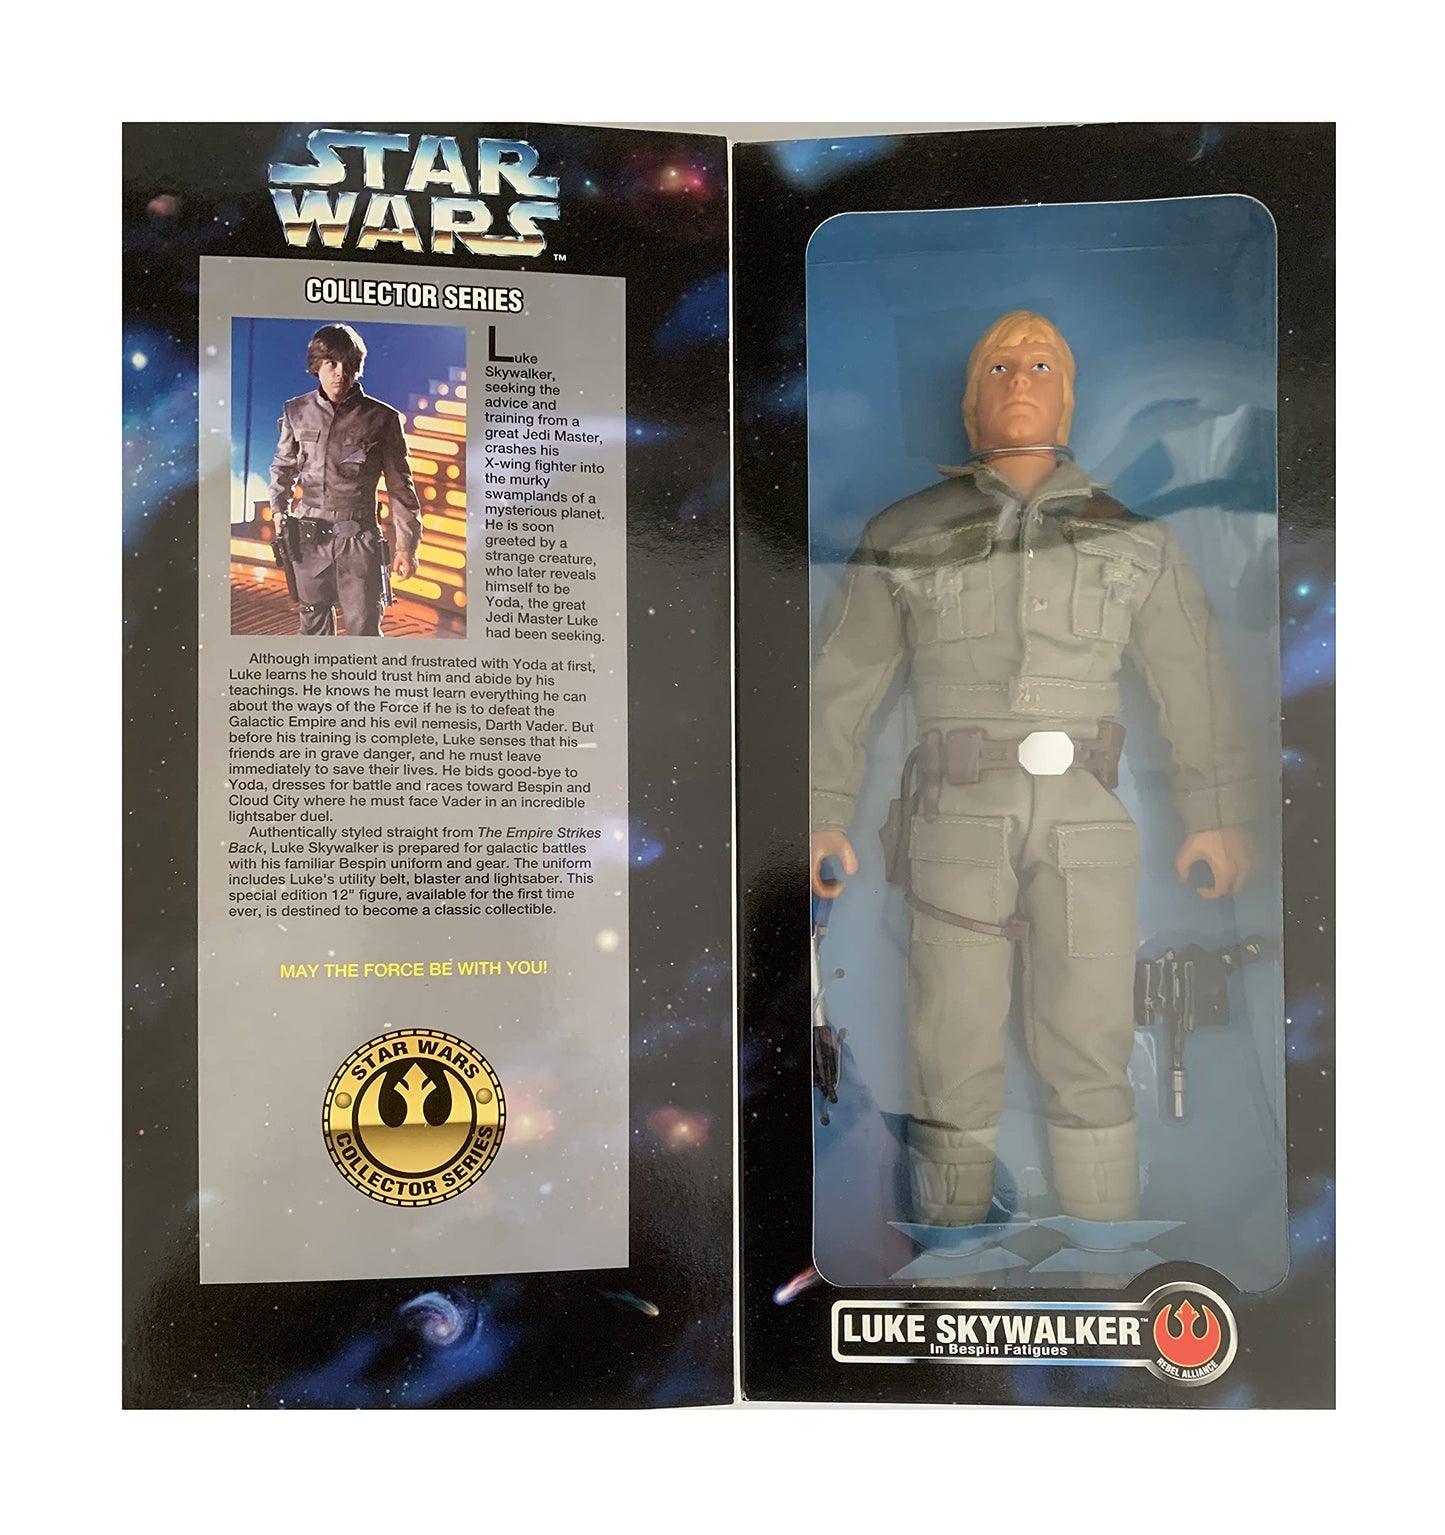 Vintage 1996 Star Wars Collector Series Luke Skywalker Bespin Fatigues 12 Inch Fully Poseable Action Figure, Authentically Styled Outfit and Accessories - Brand New Shop Stock Room Find